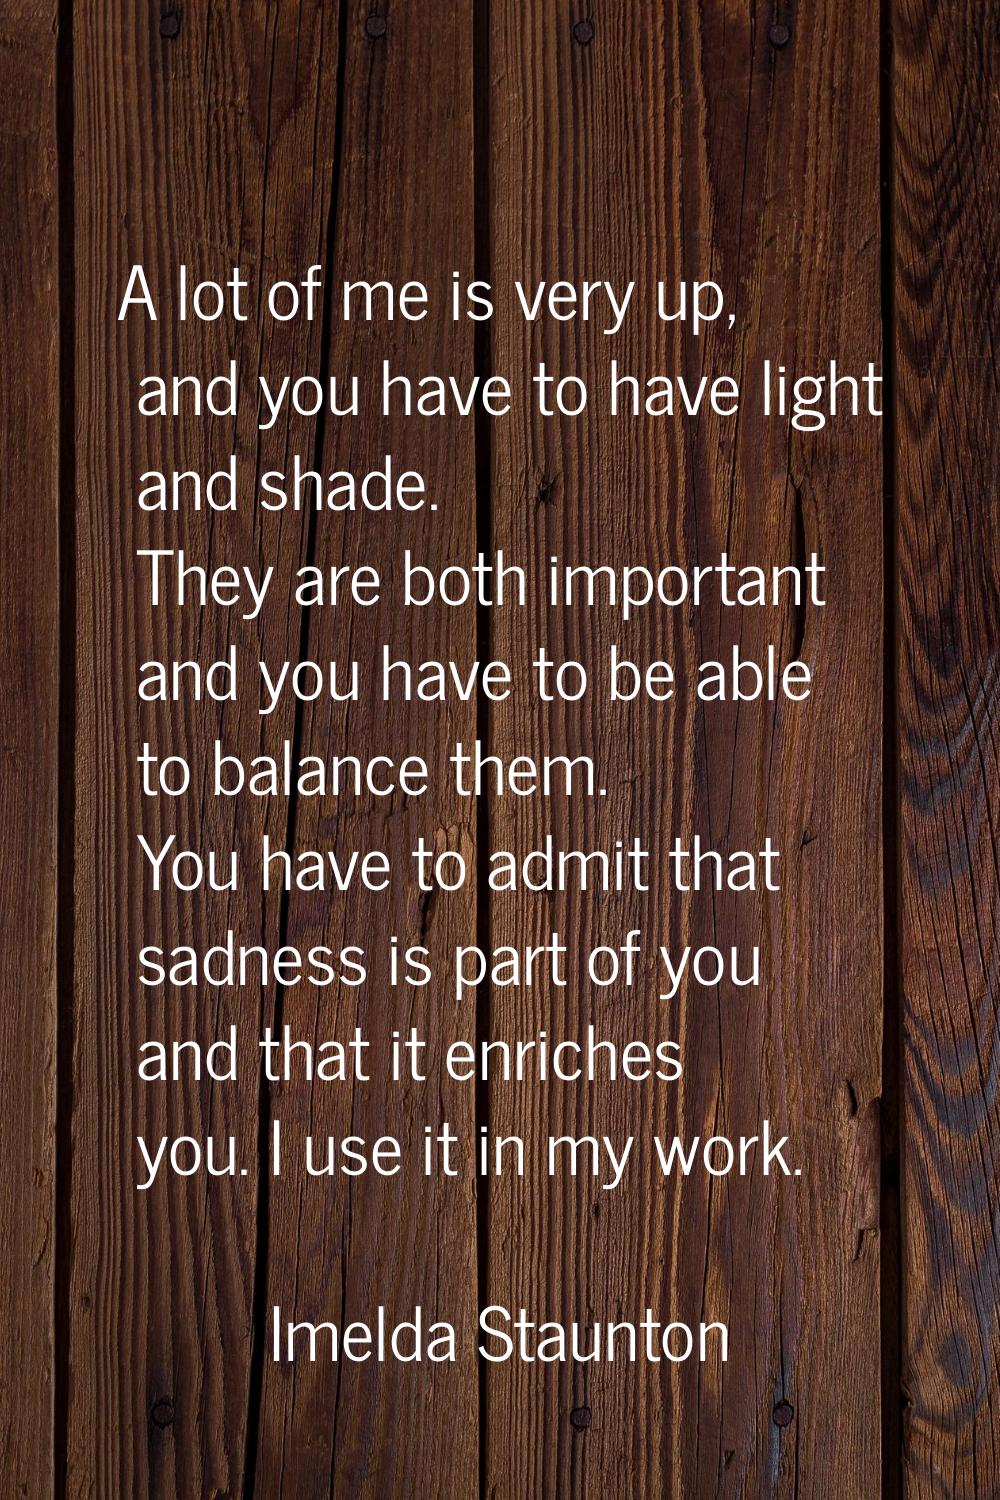 A lot of me is very up, and you have to have light and shade. They are both important and you have 